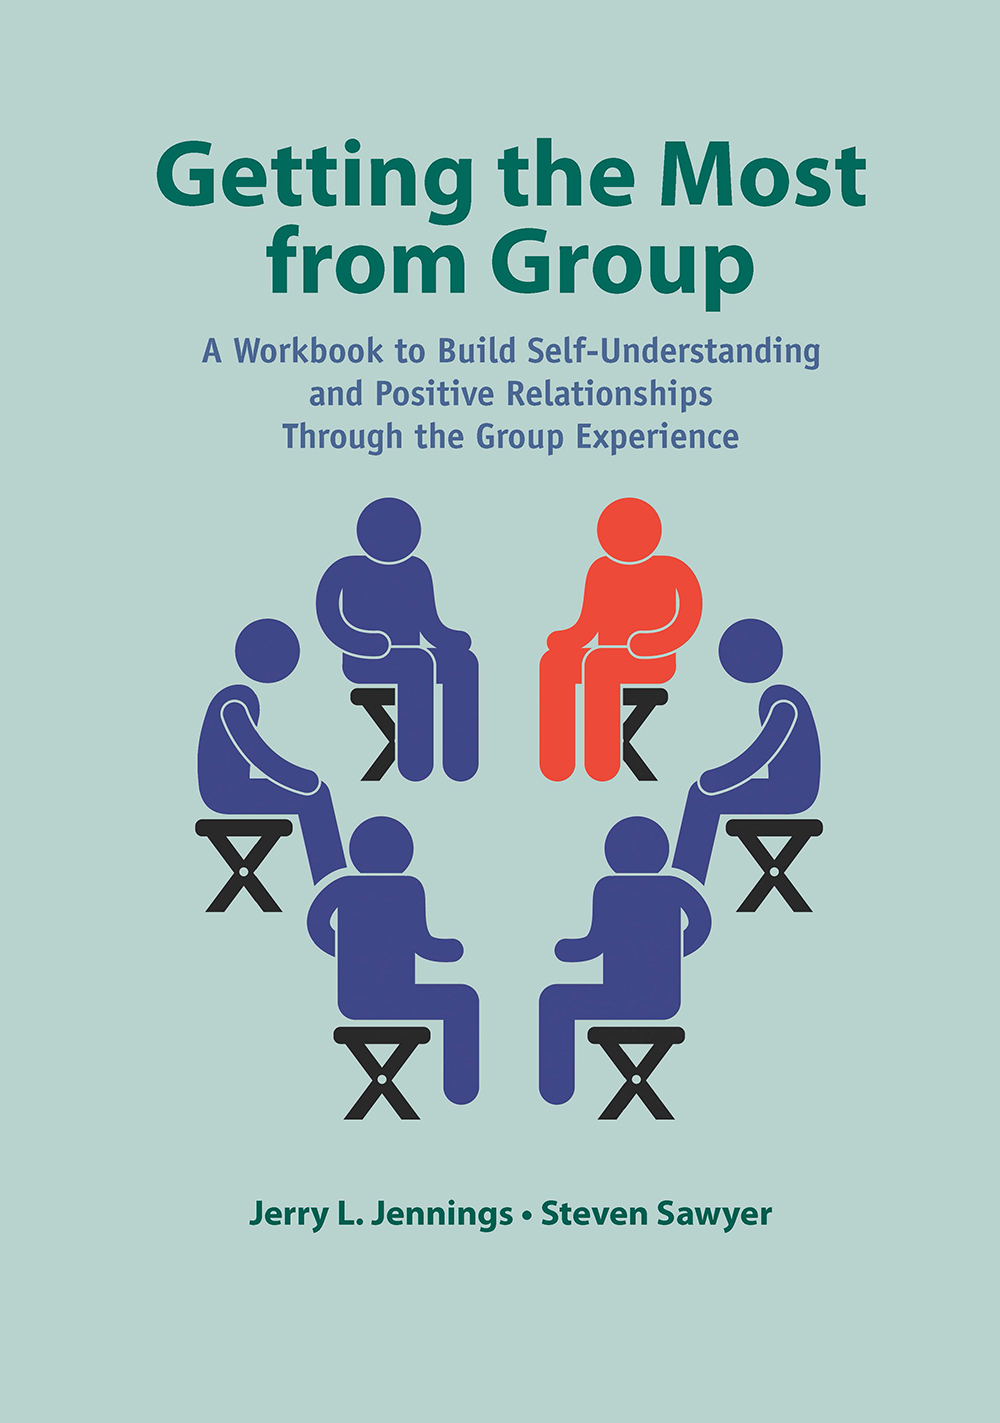 Getting the Most from Group by Jerry Jennings